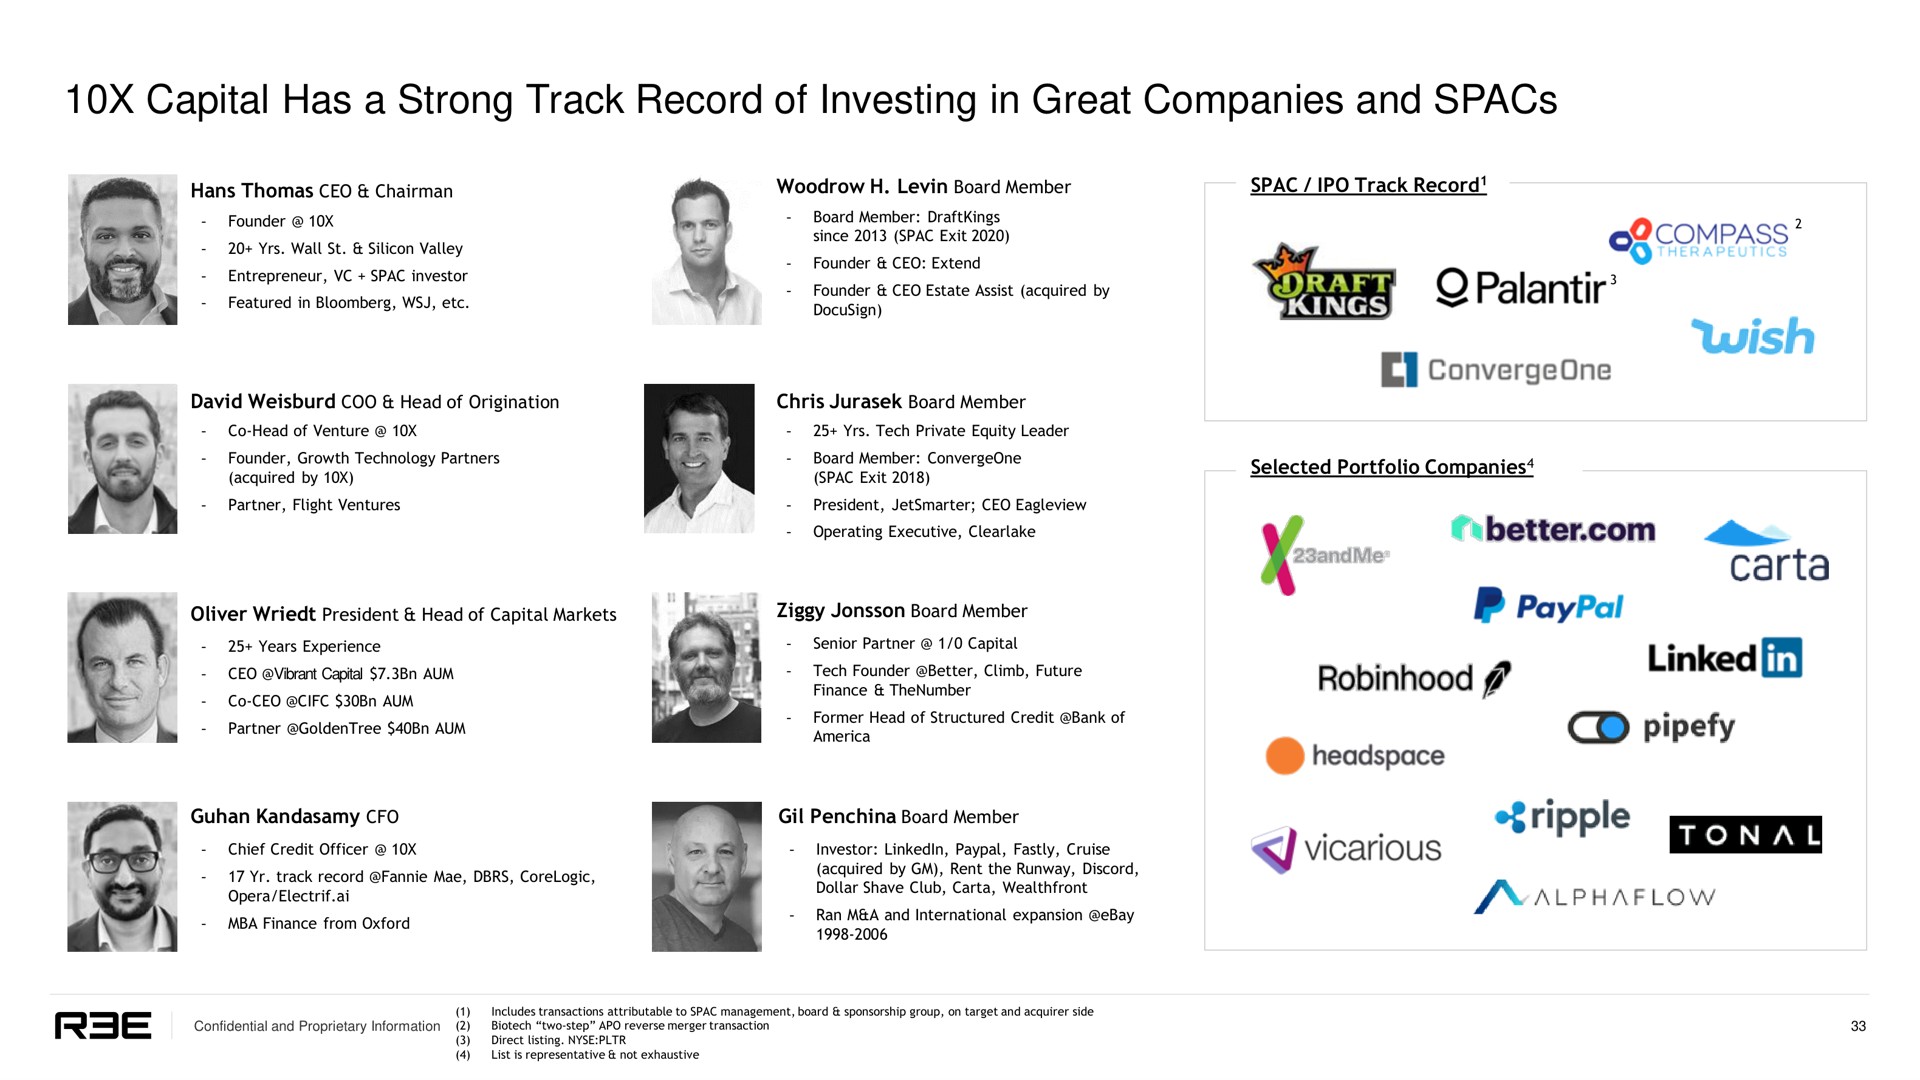 capital has a strong track record of investing in great companies and compass better linked vicarious | REE